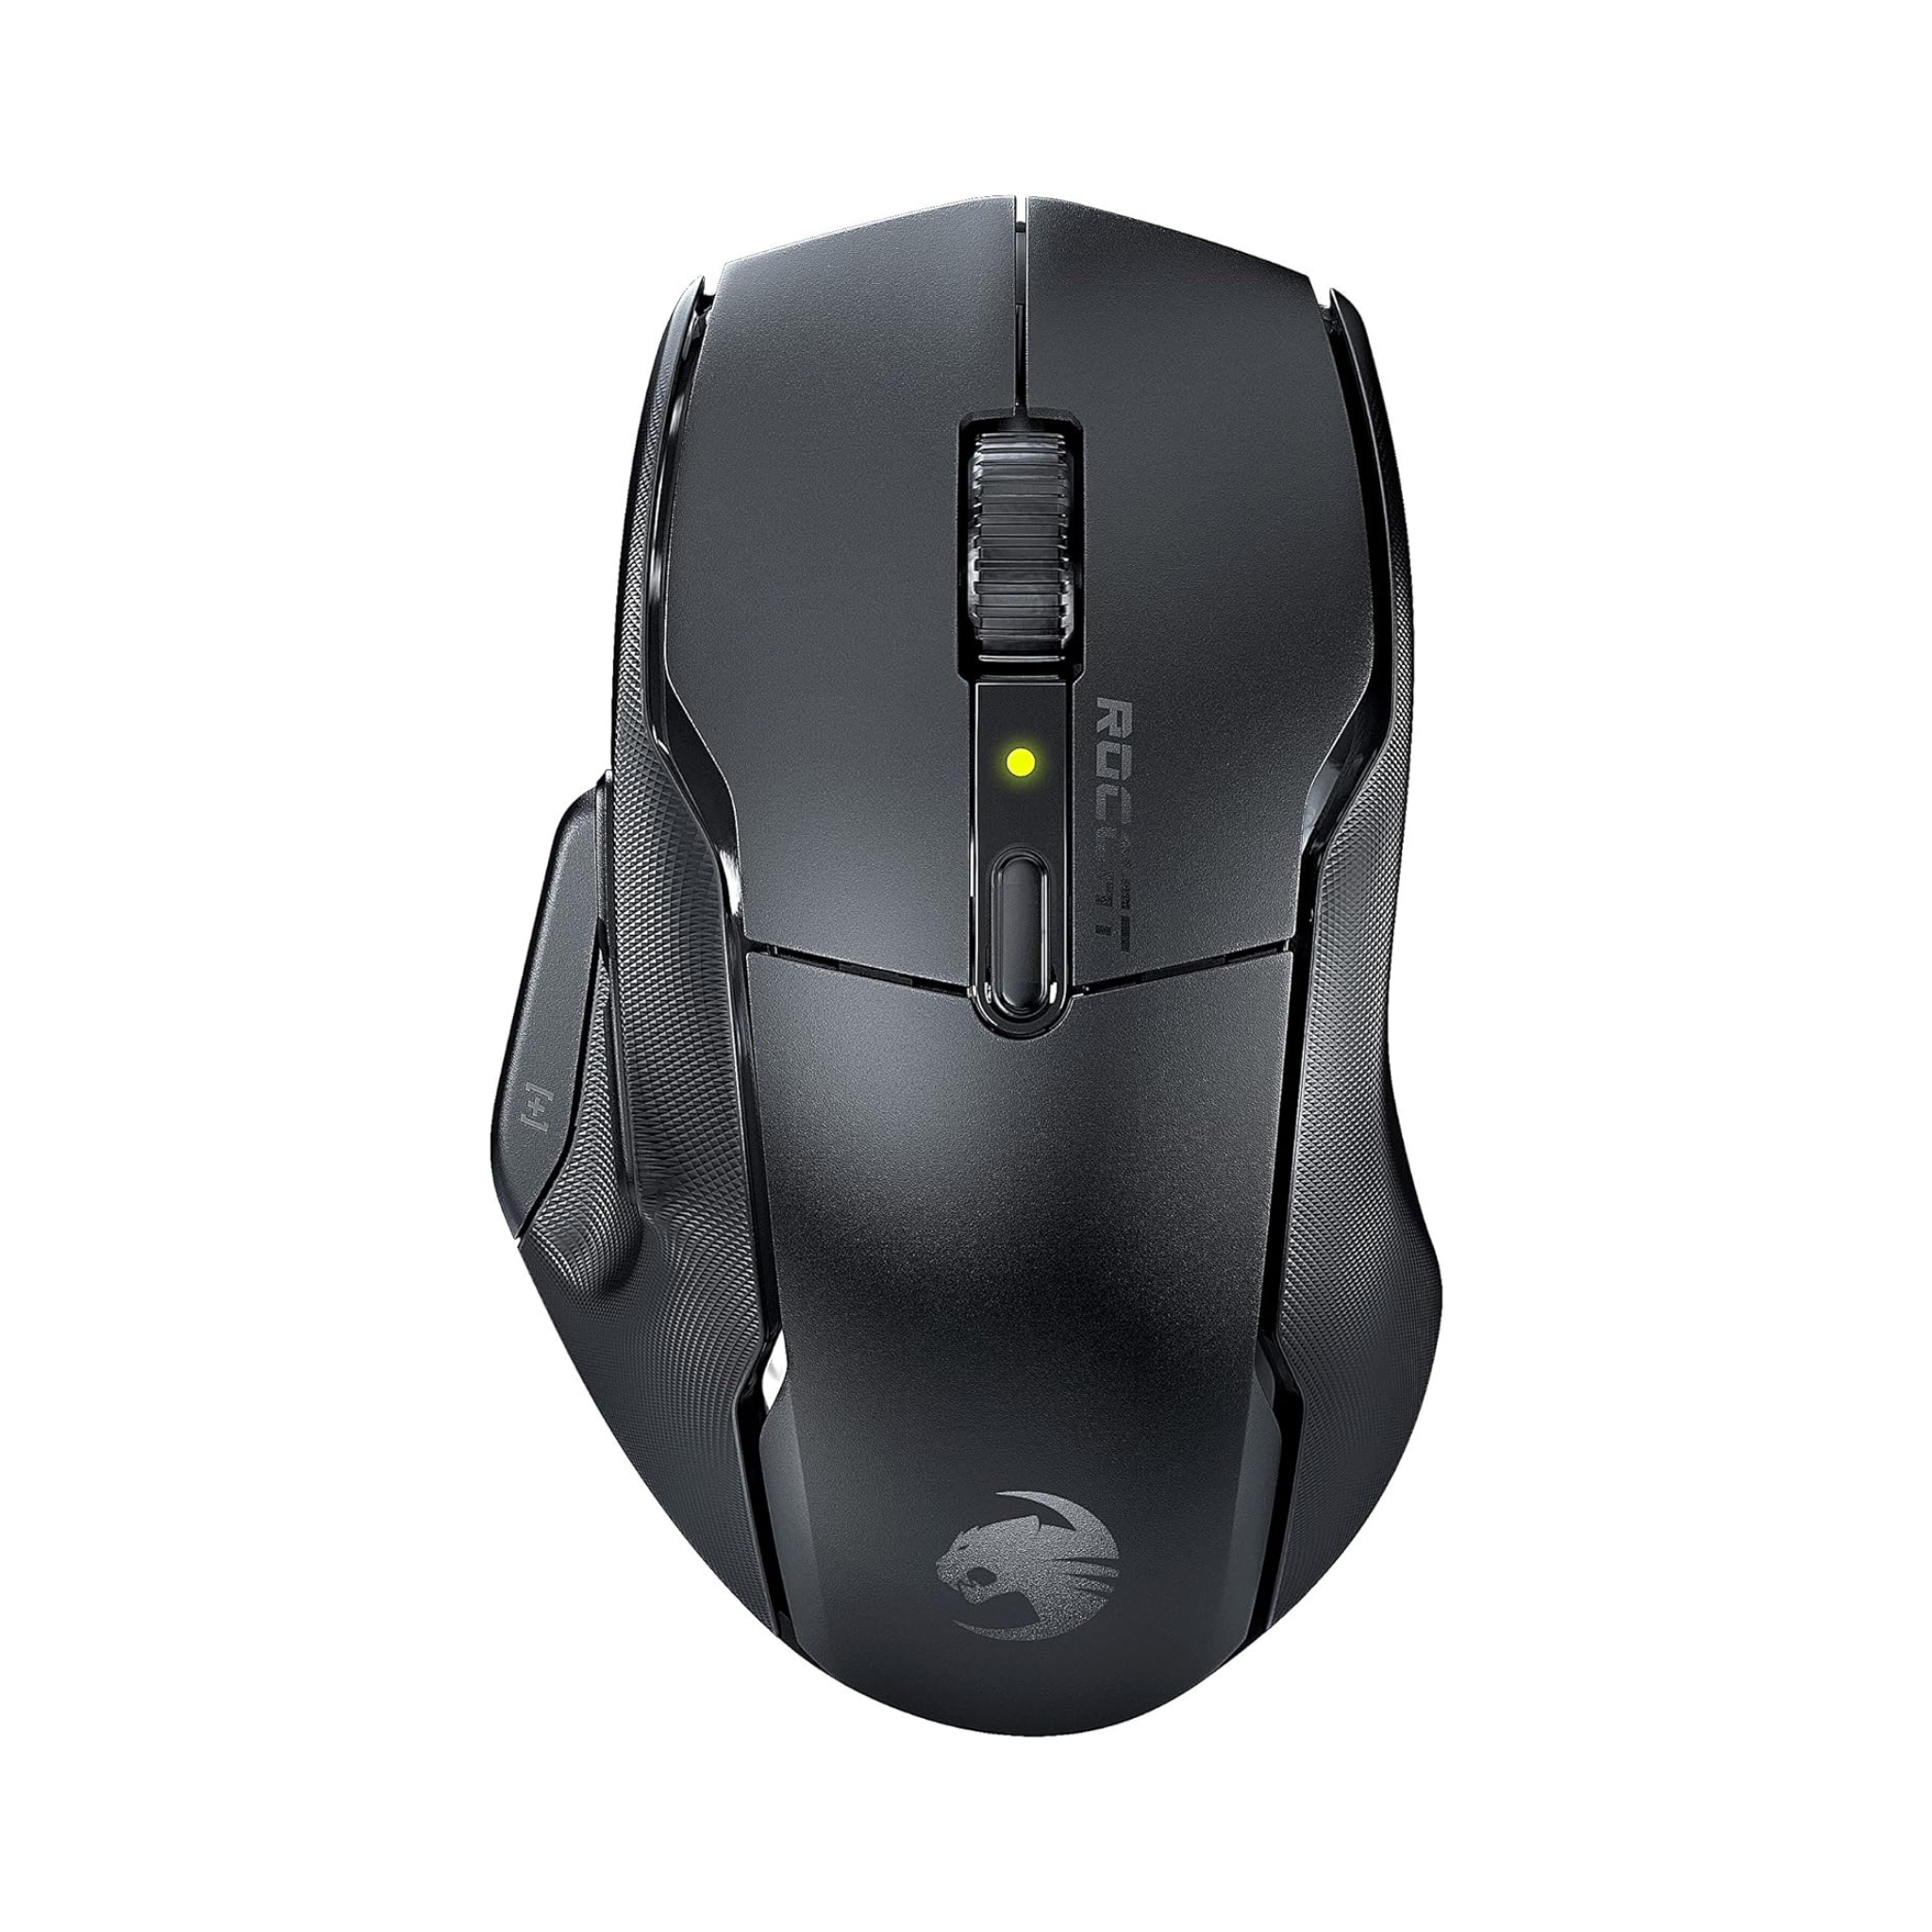 ROCCAT Kone Air Wireless Optical Gaming Mouse (Black or White)